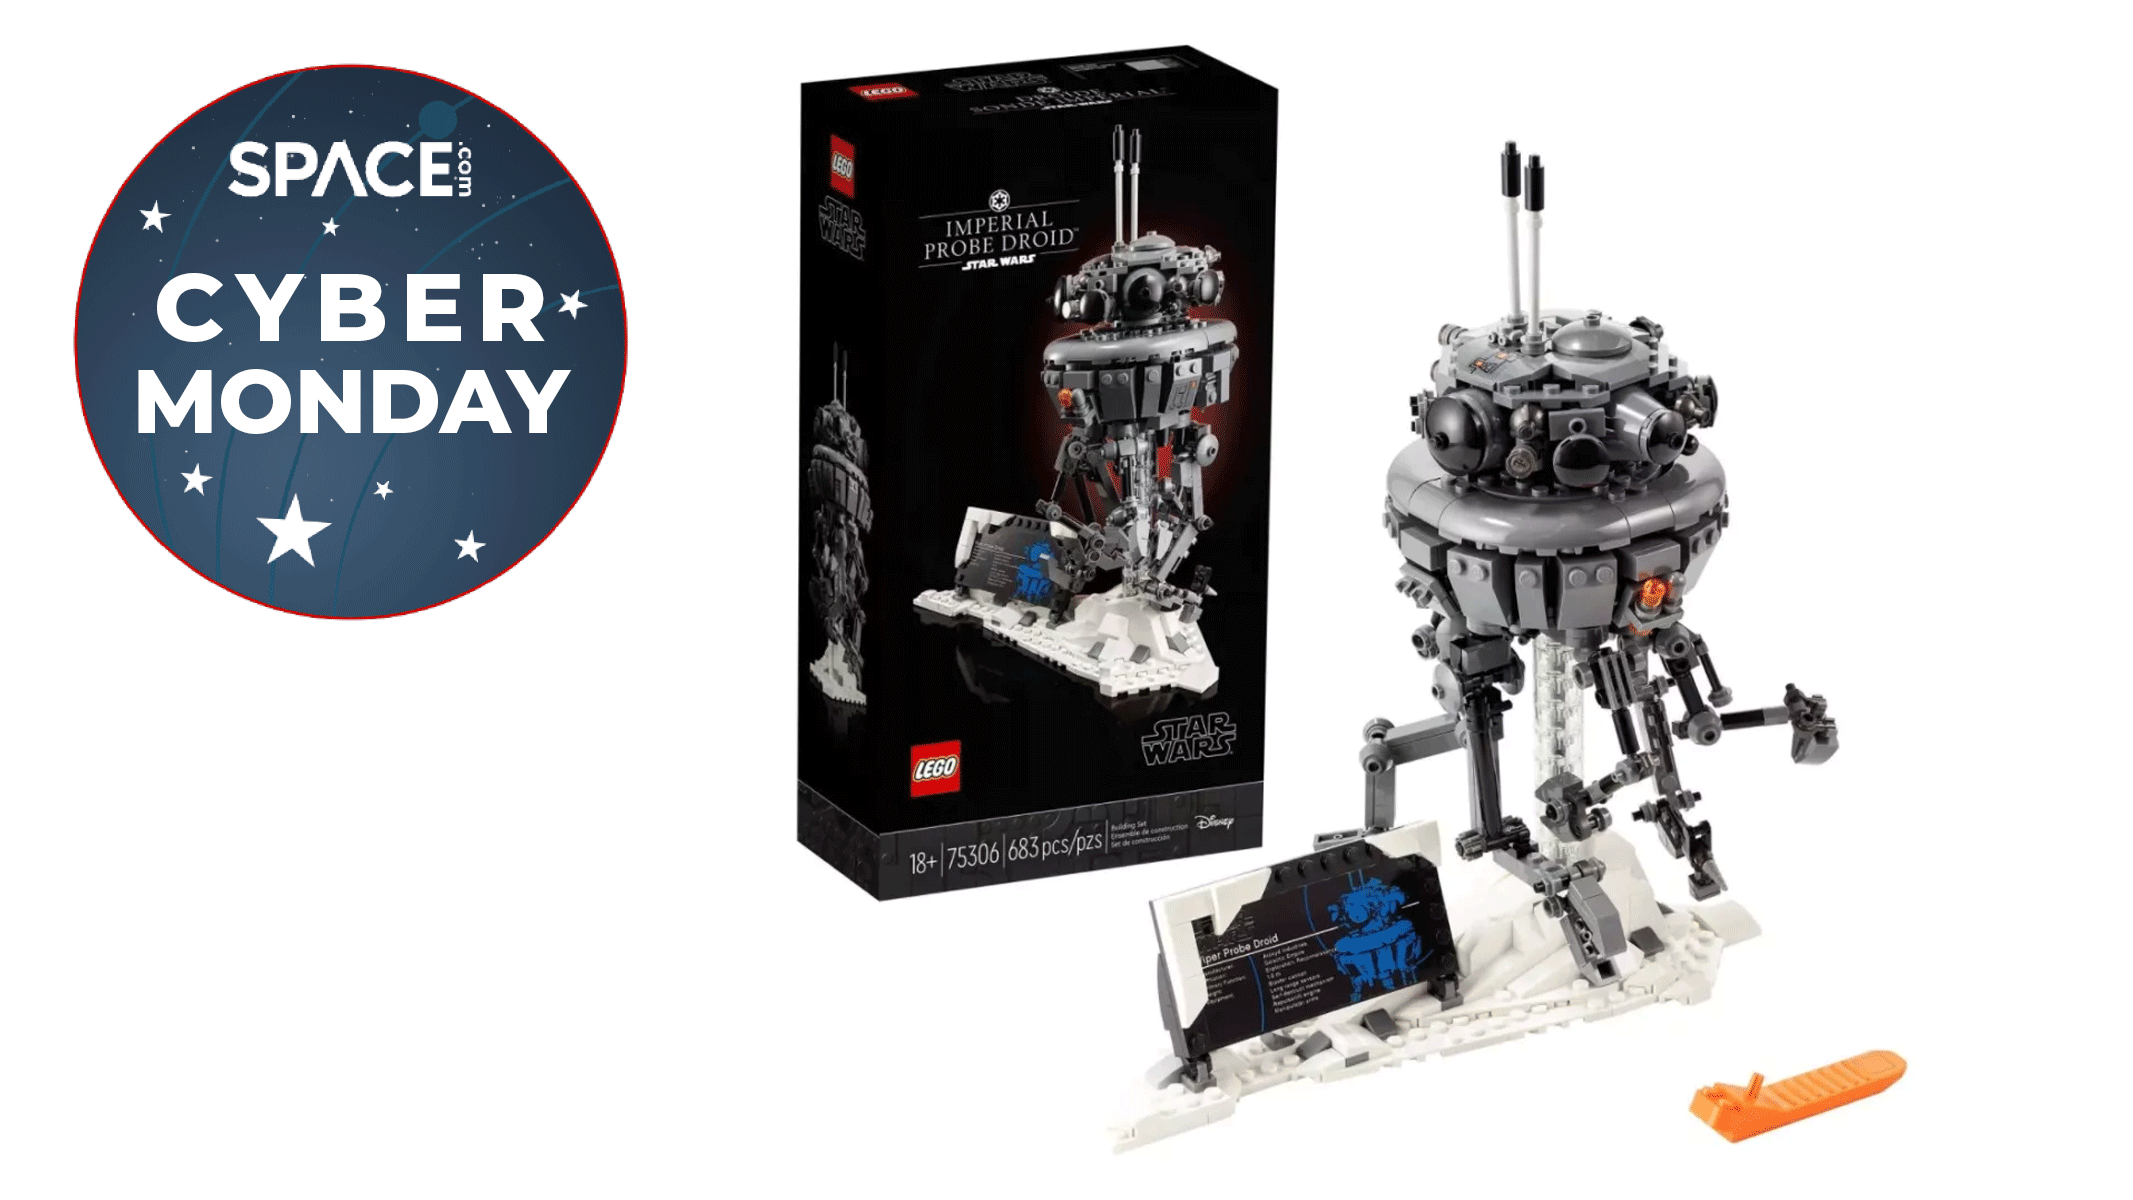 Charotar Globe Daily Lego star wars imperial droid with cyber monday deal logo